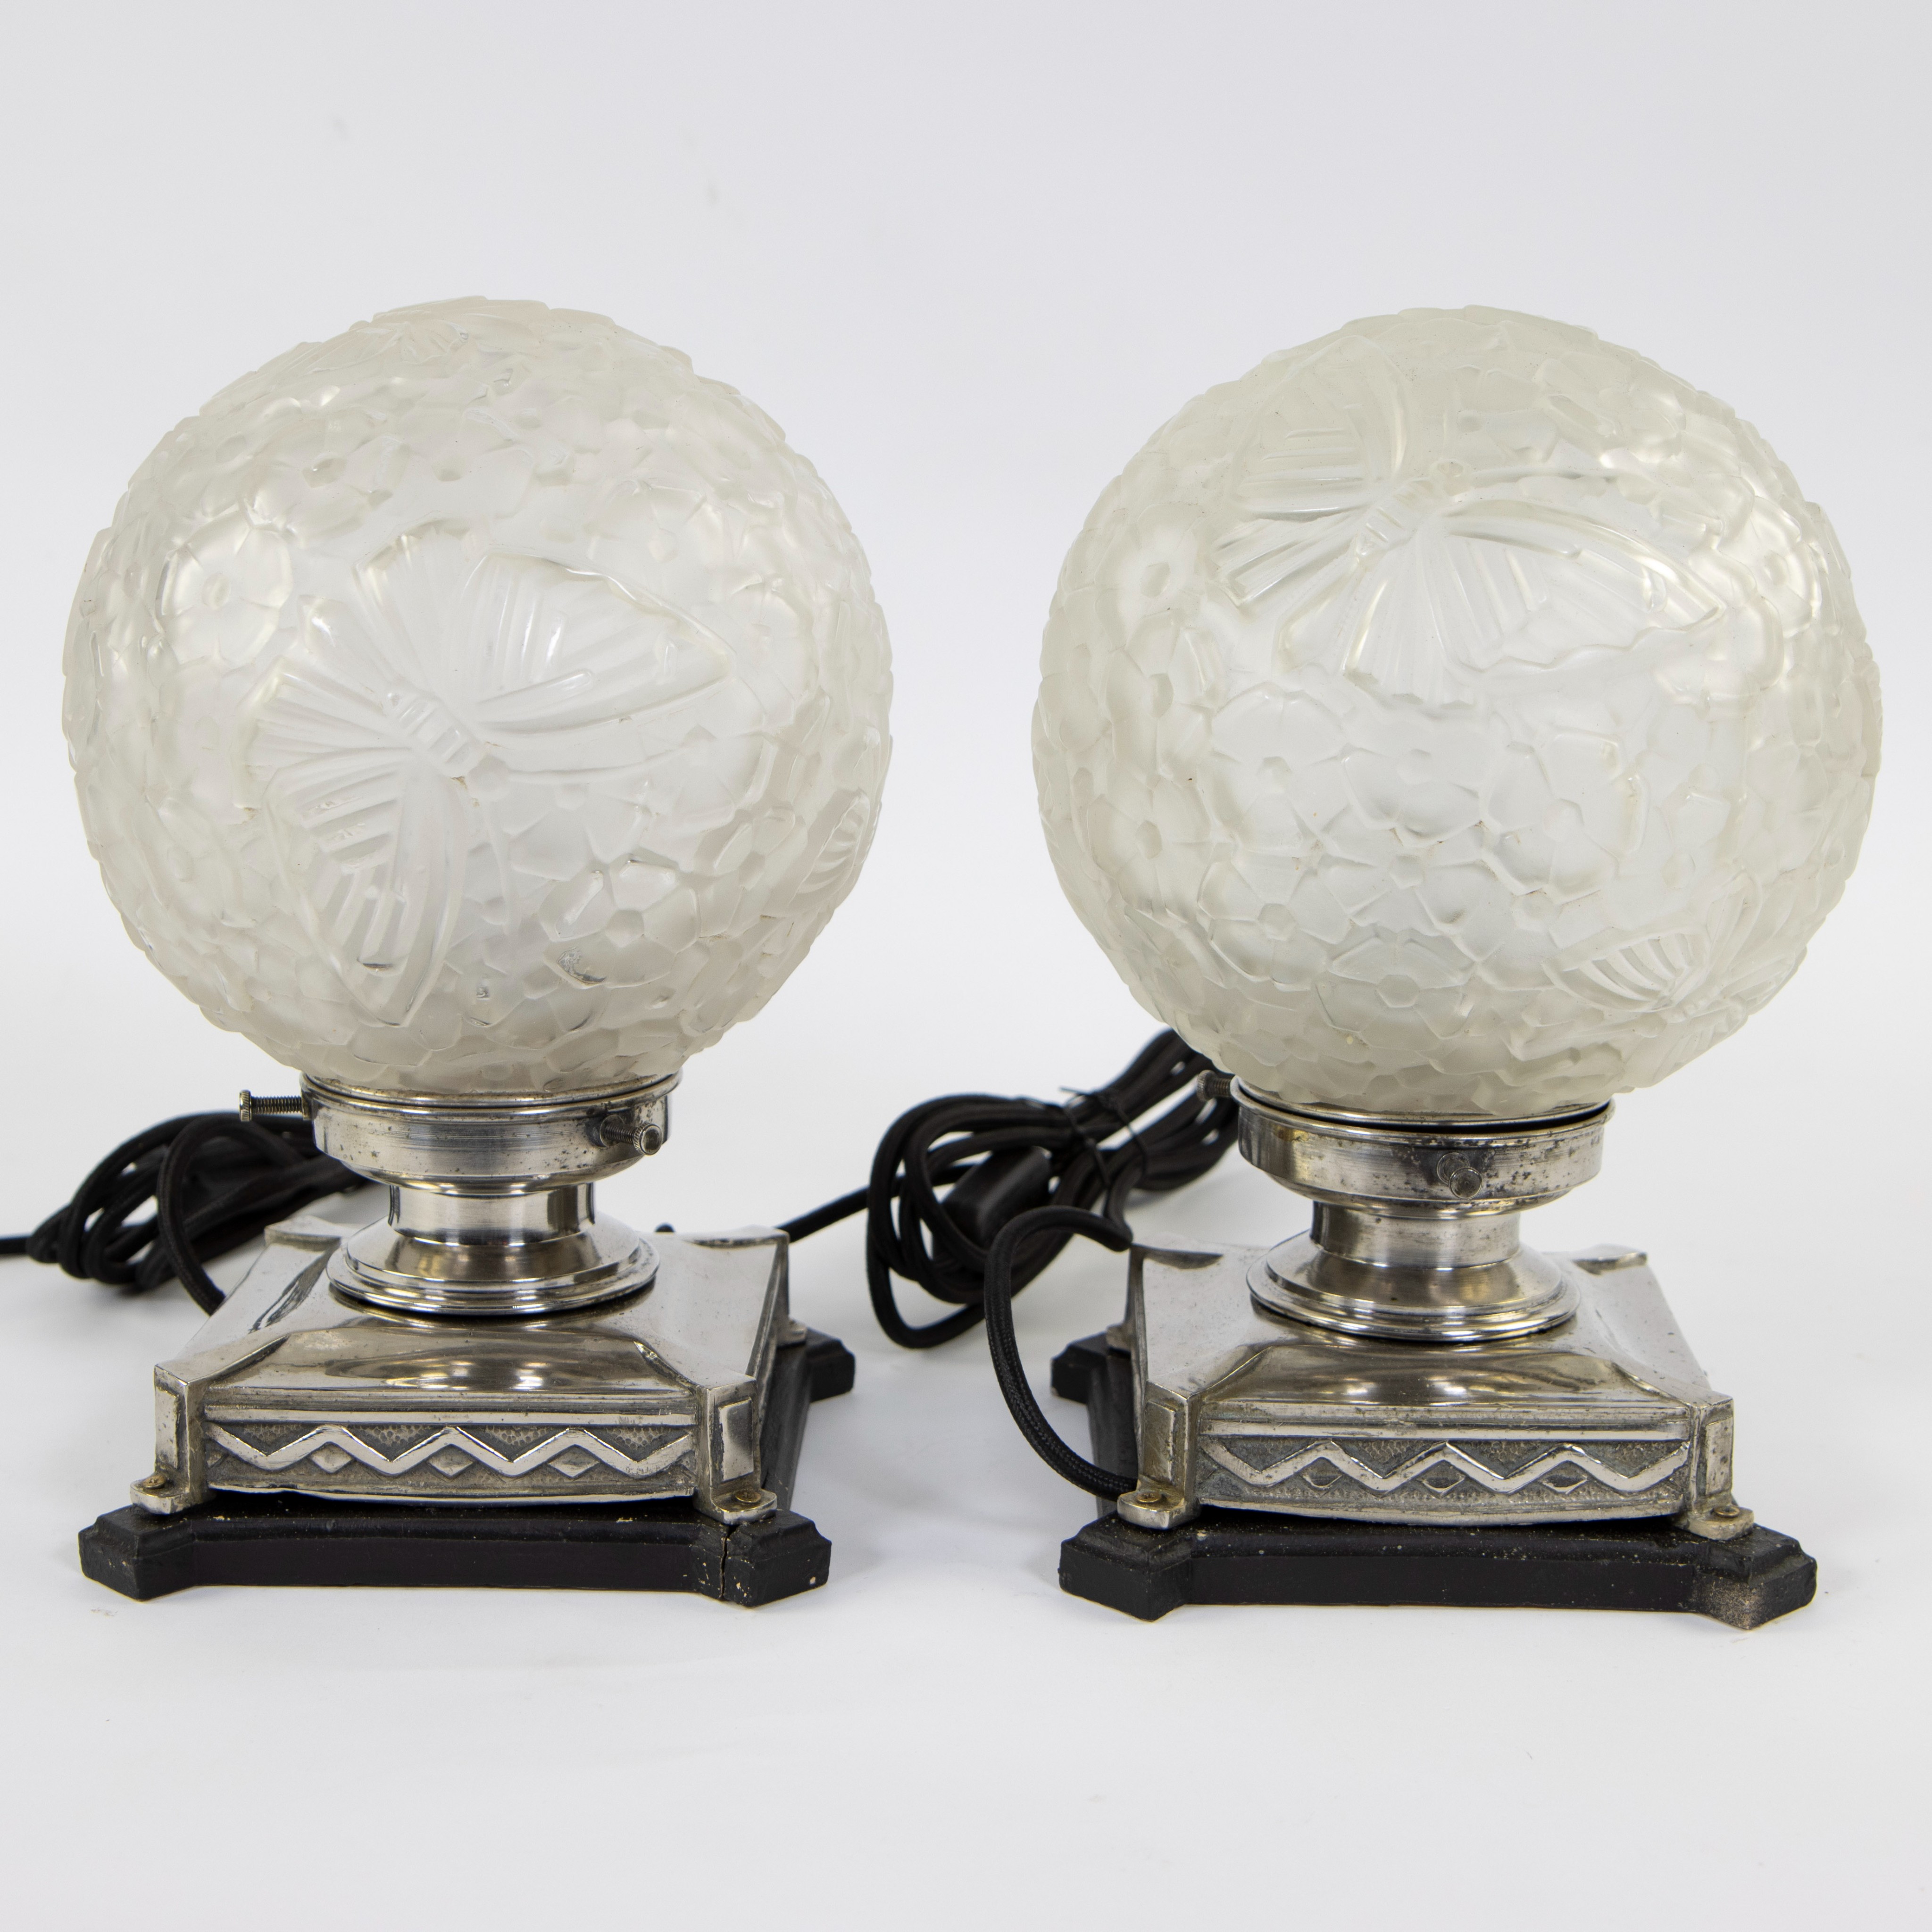 Pair of Art Deco table lamps in silver plated brass and glass balls with butterfly motif - Image 4 of 4